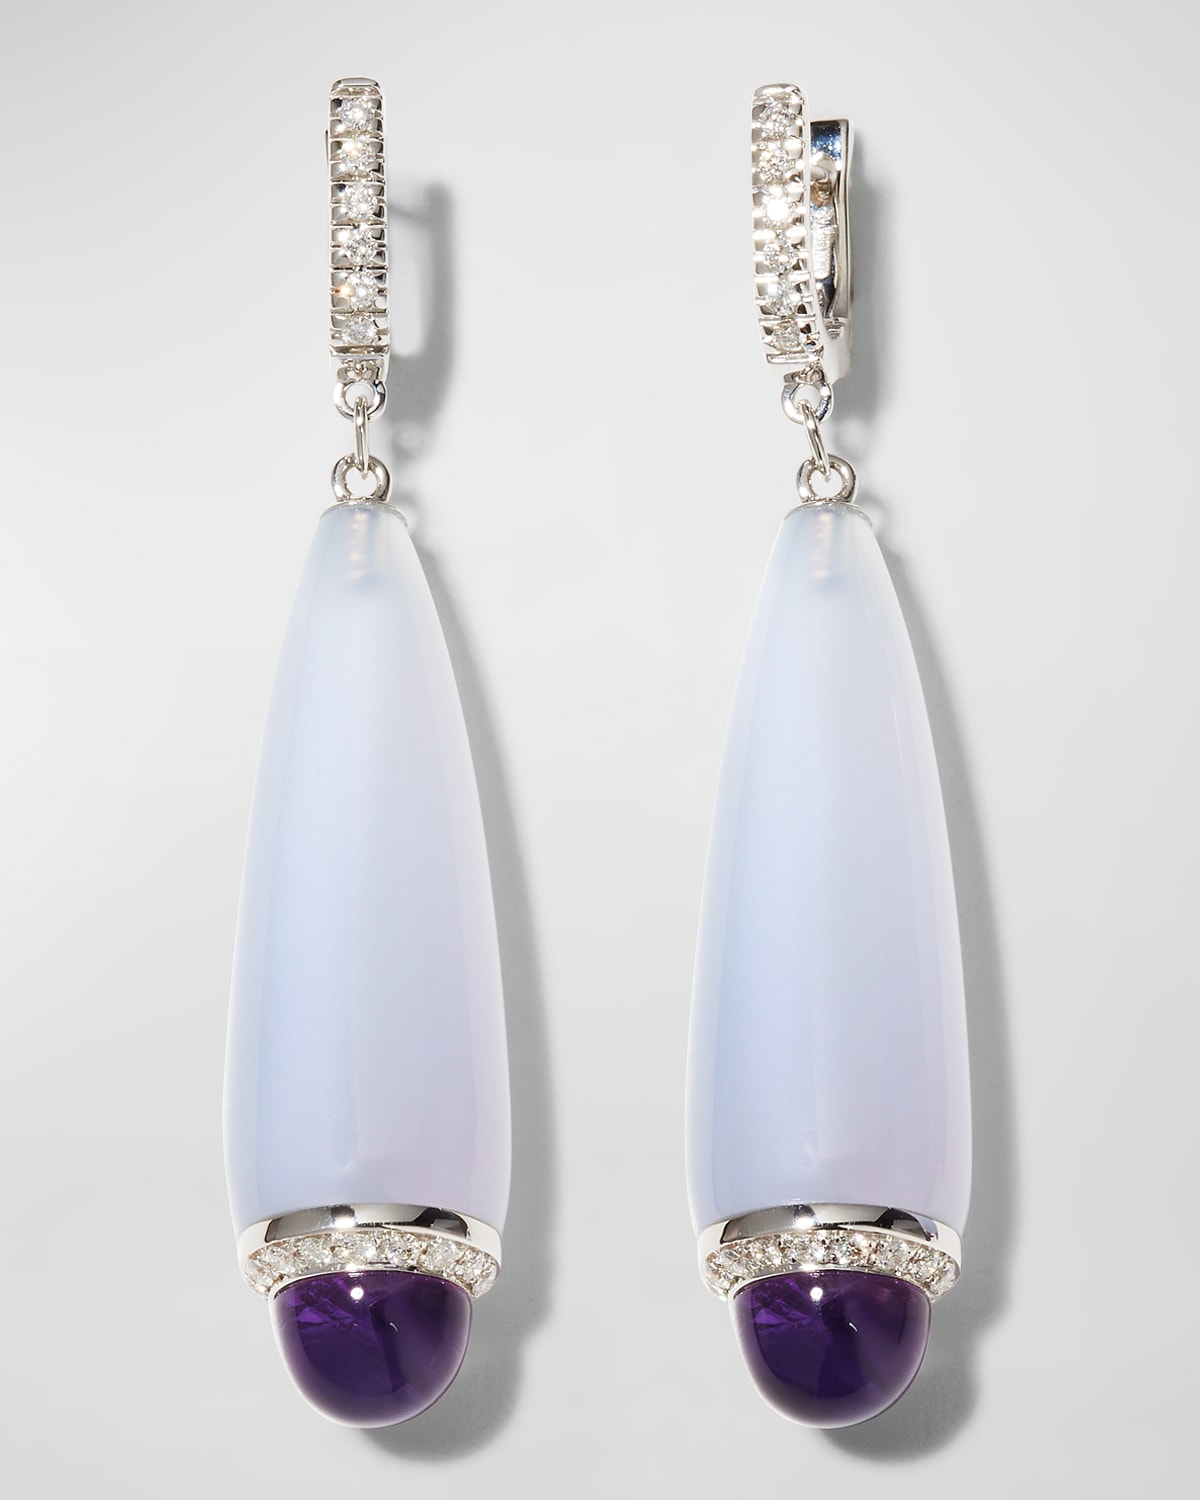 Sanalitro 18k White Gold Isotta Earrings With Chalcedony, Amethyst And Diamonds